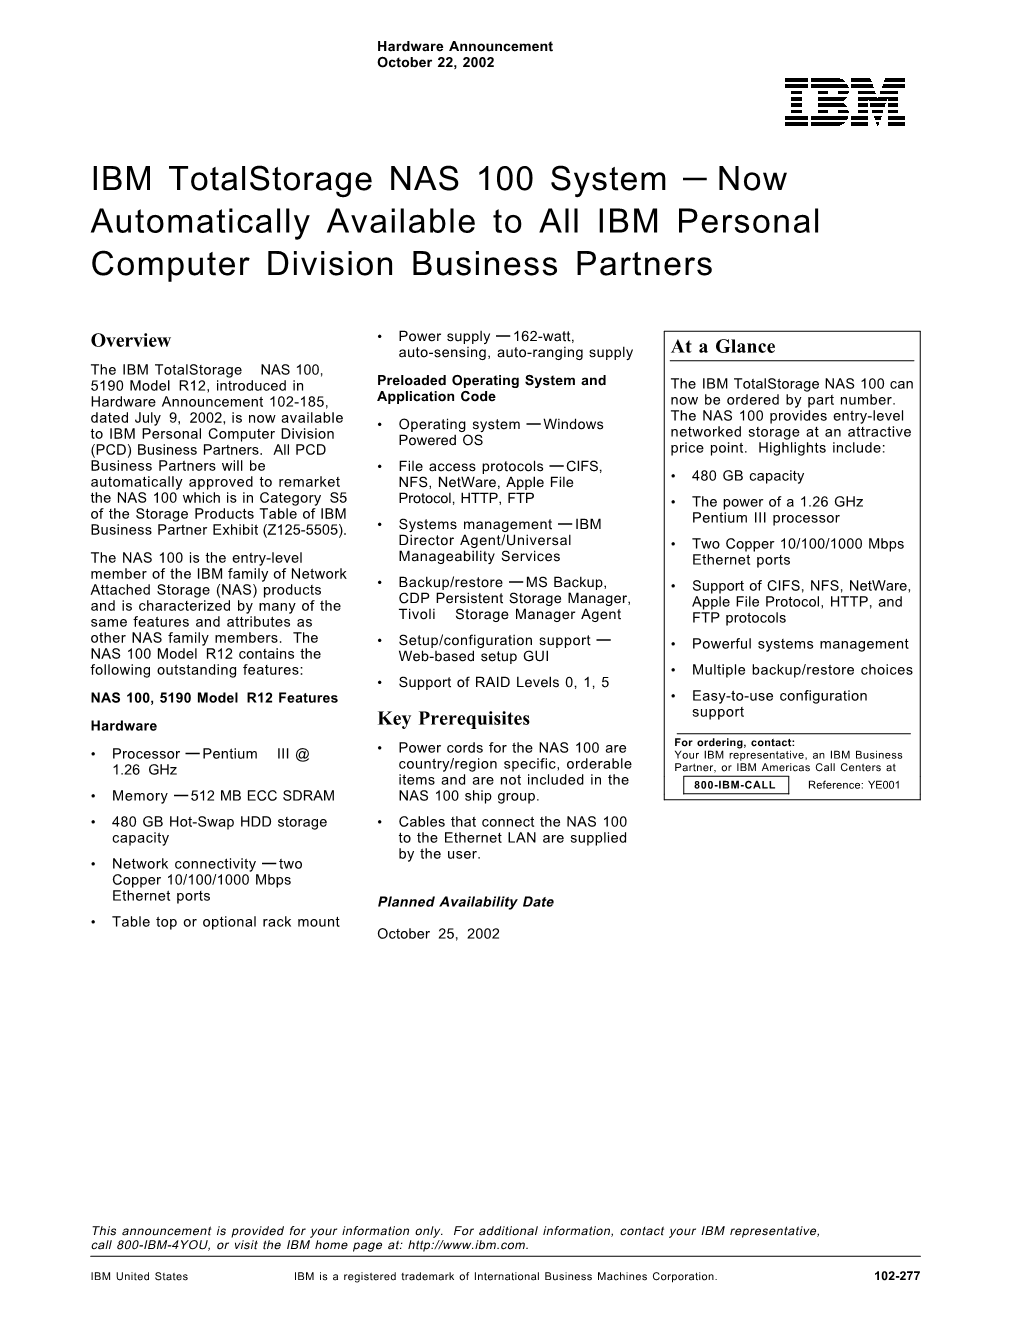 IBM Totalstorage NAS 100 System — Now Automatically Available to All IBM Personal Computer Division Business Partners